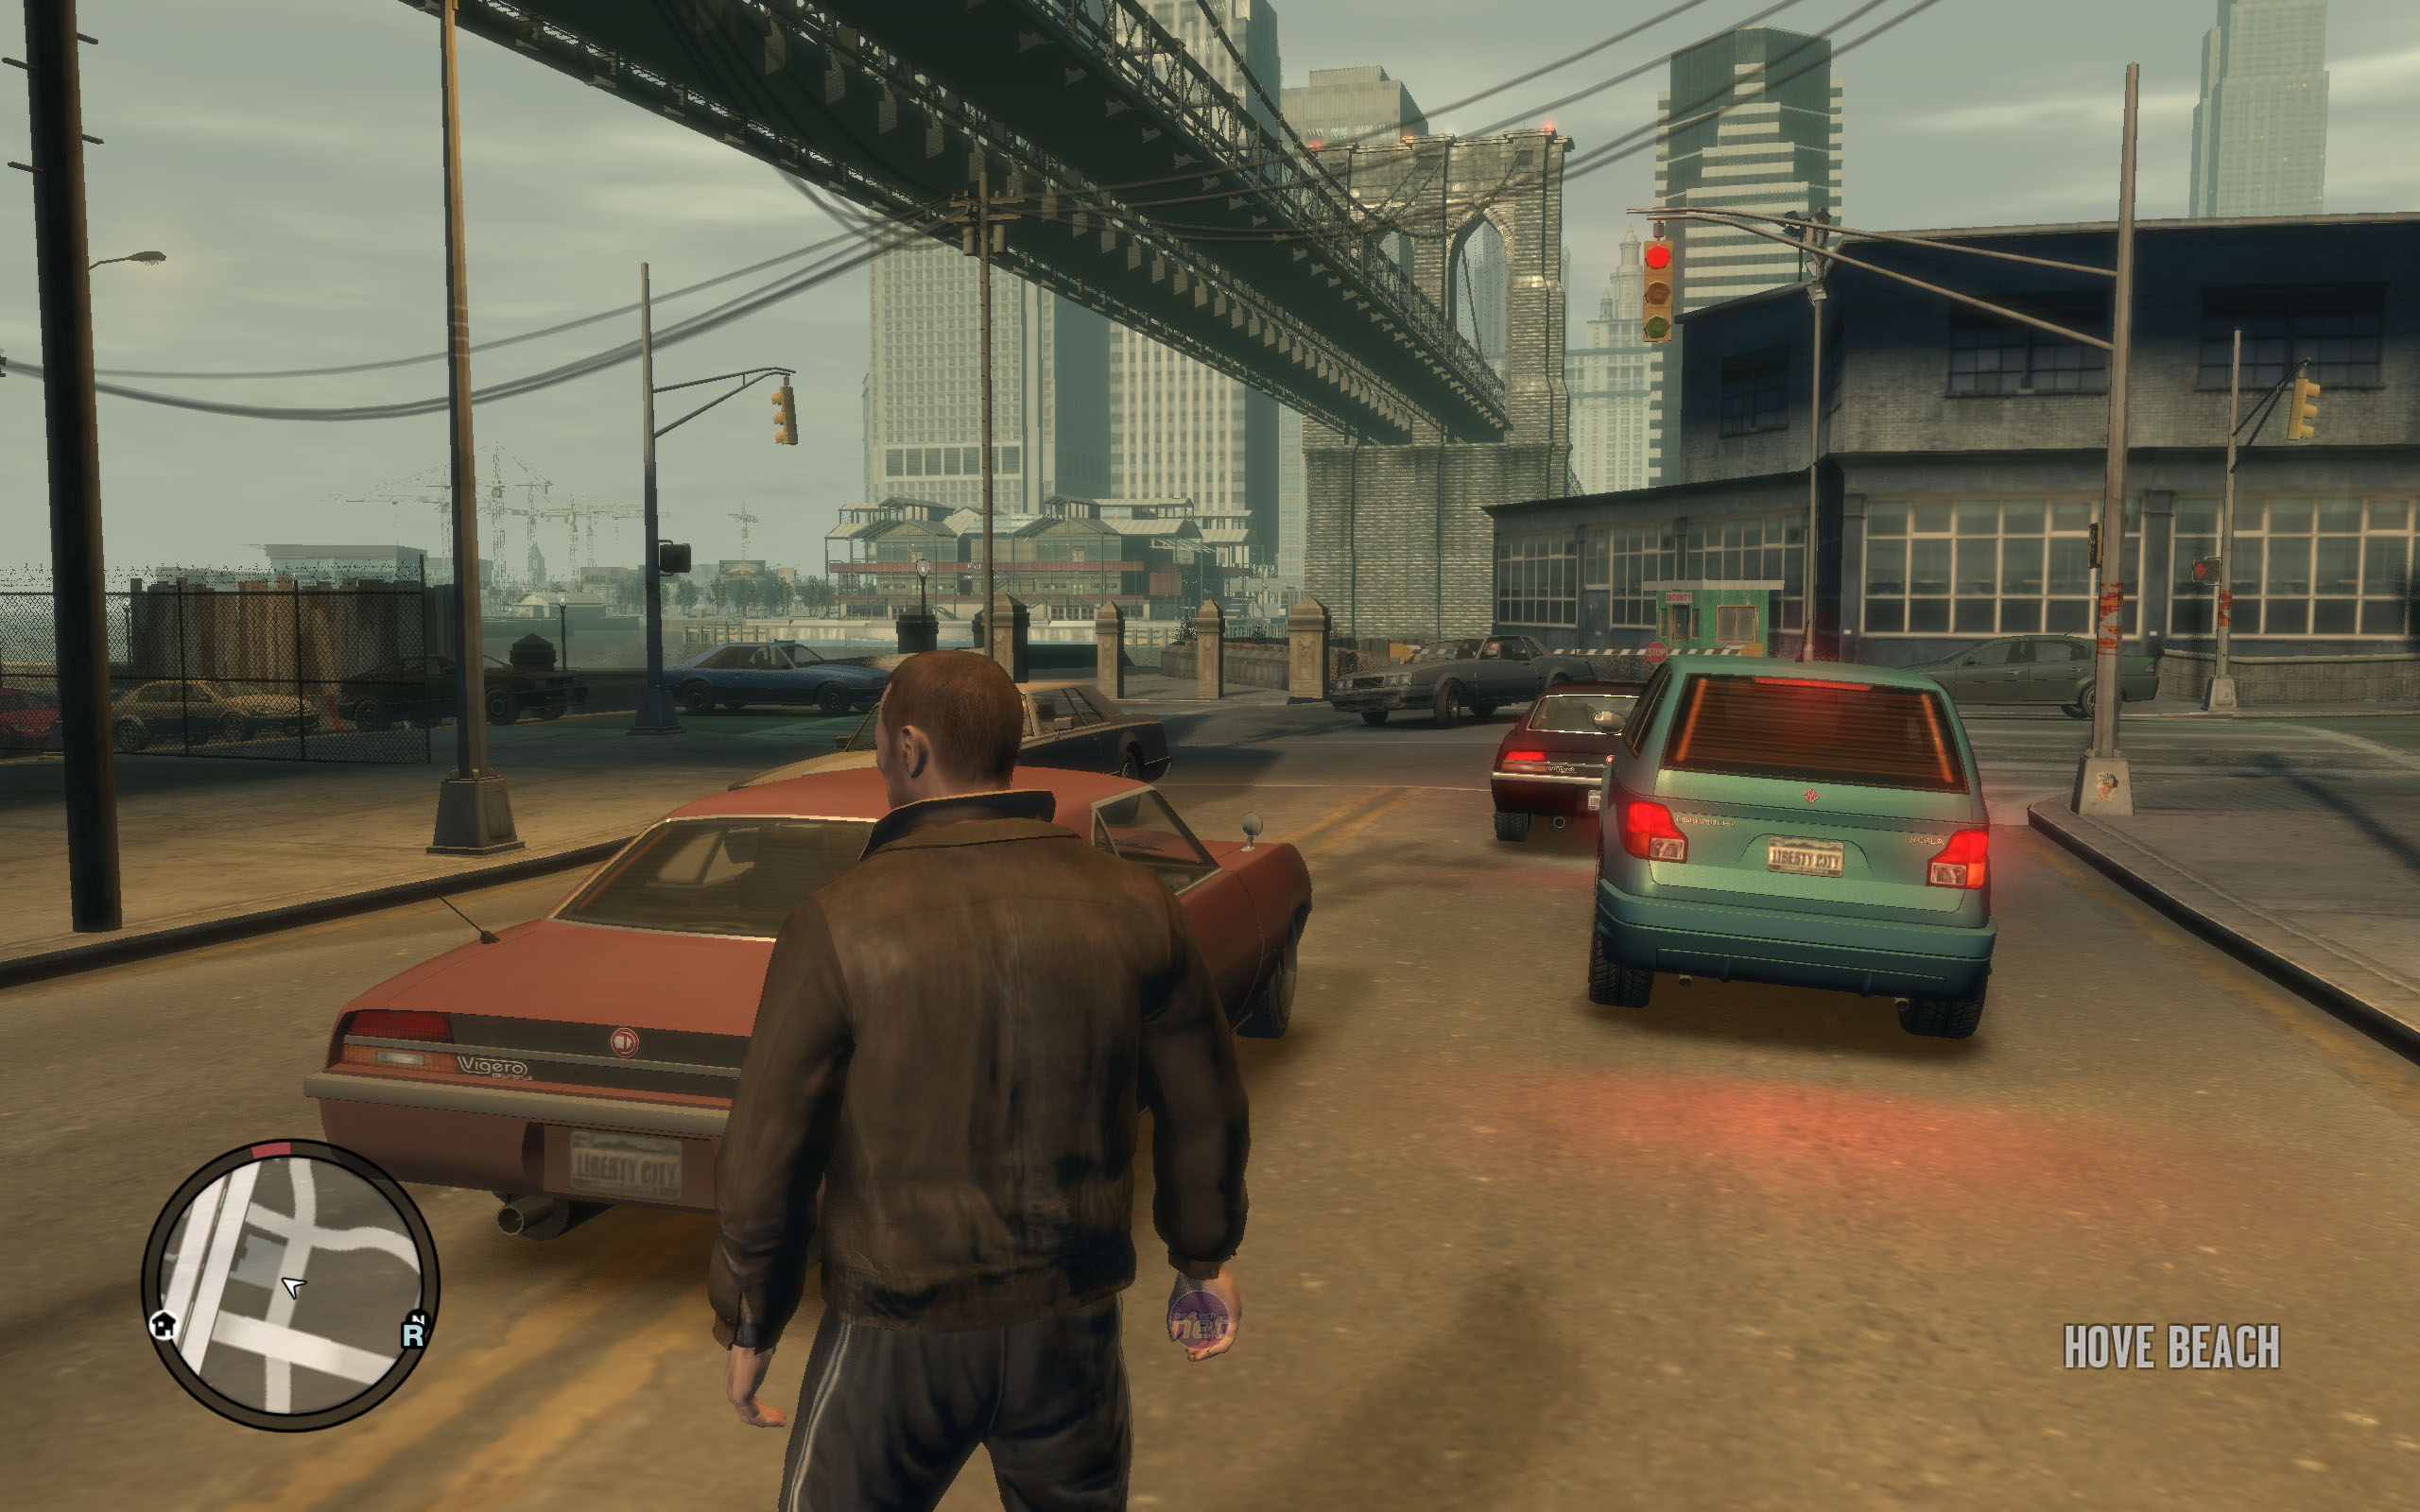 play the game grand theft auto online